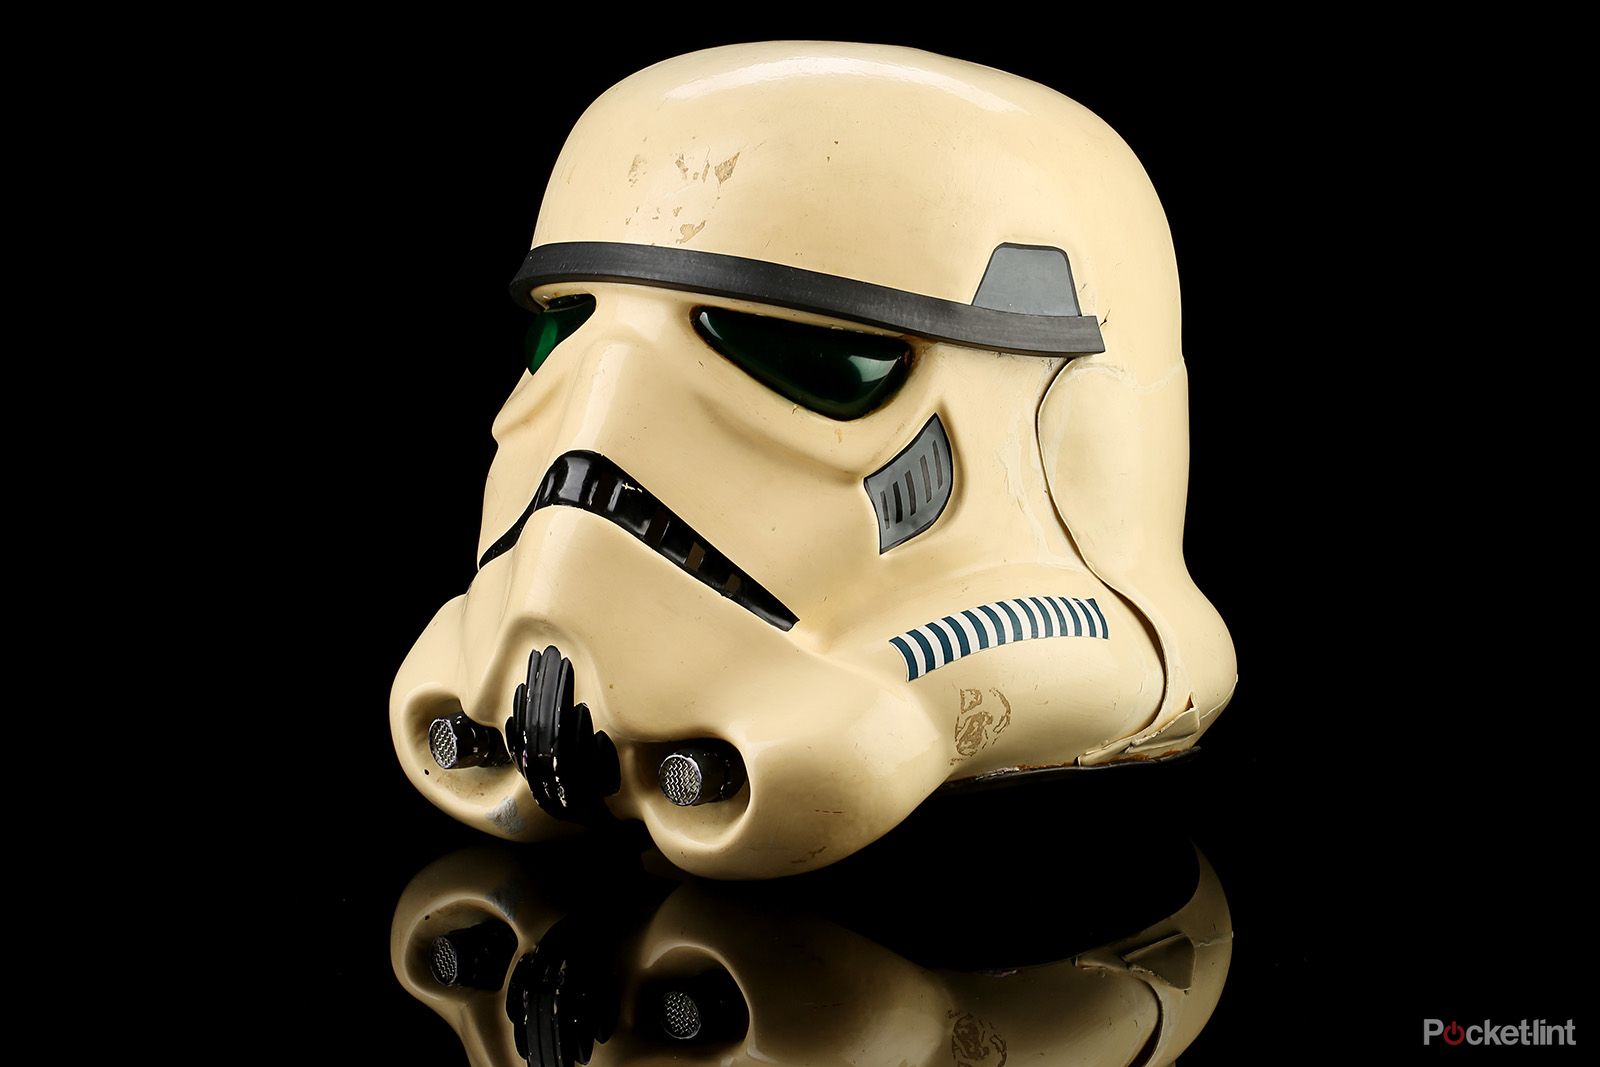 10 incredible star wars props you could own including a stormtrooper helmet worth 60k image 1